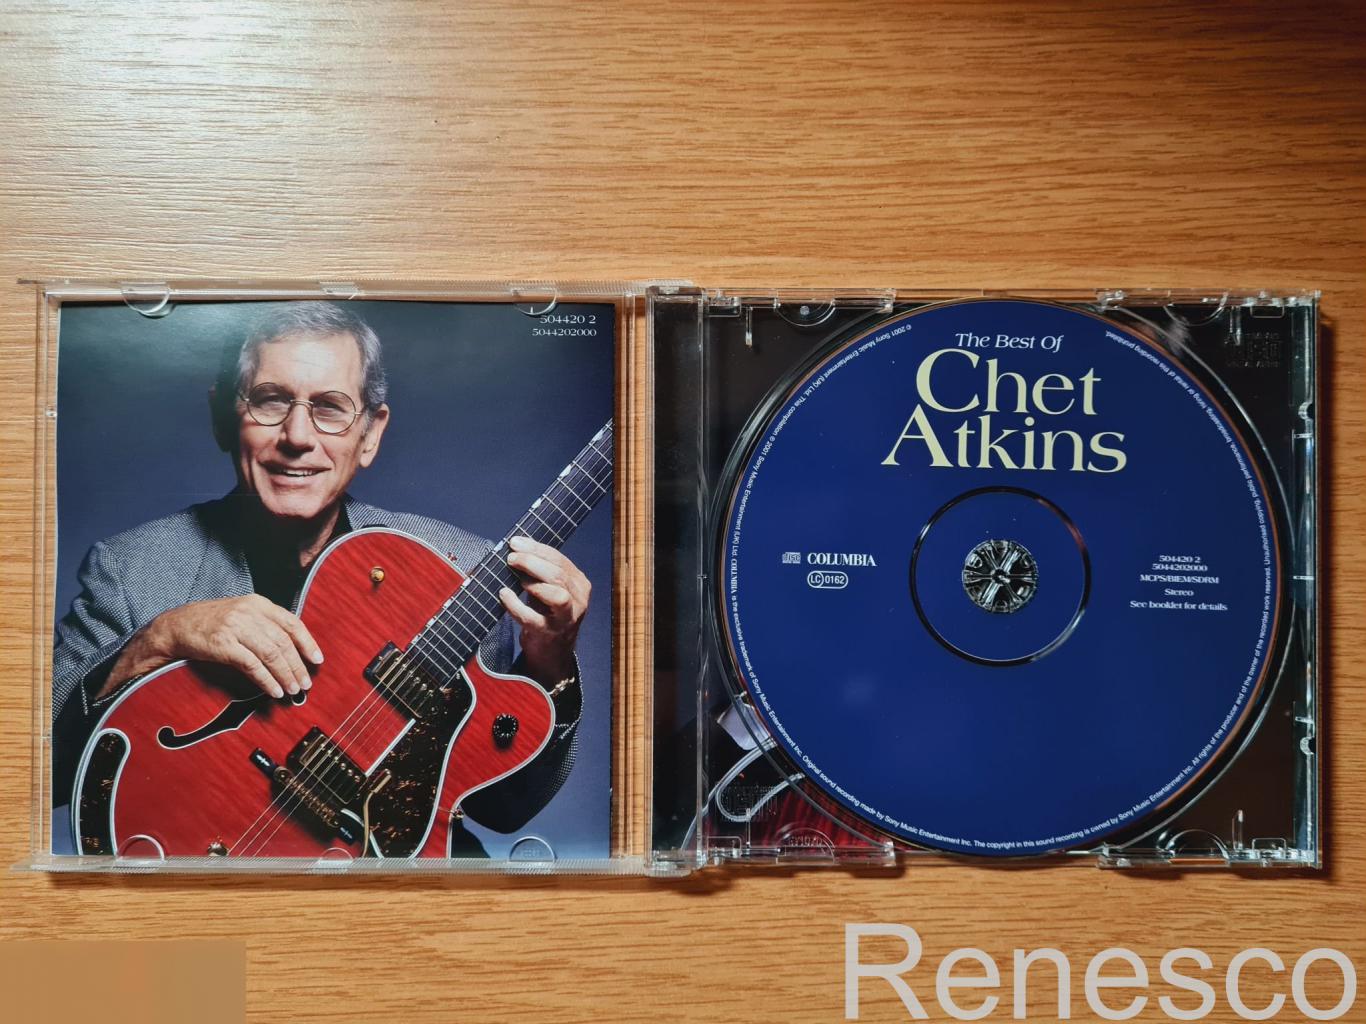 Chet Atkins ?– The Best Of Chet Atkins (Europe) (2001) 2